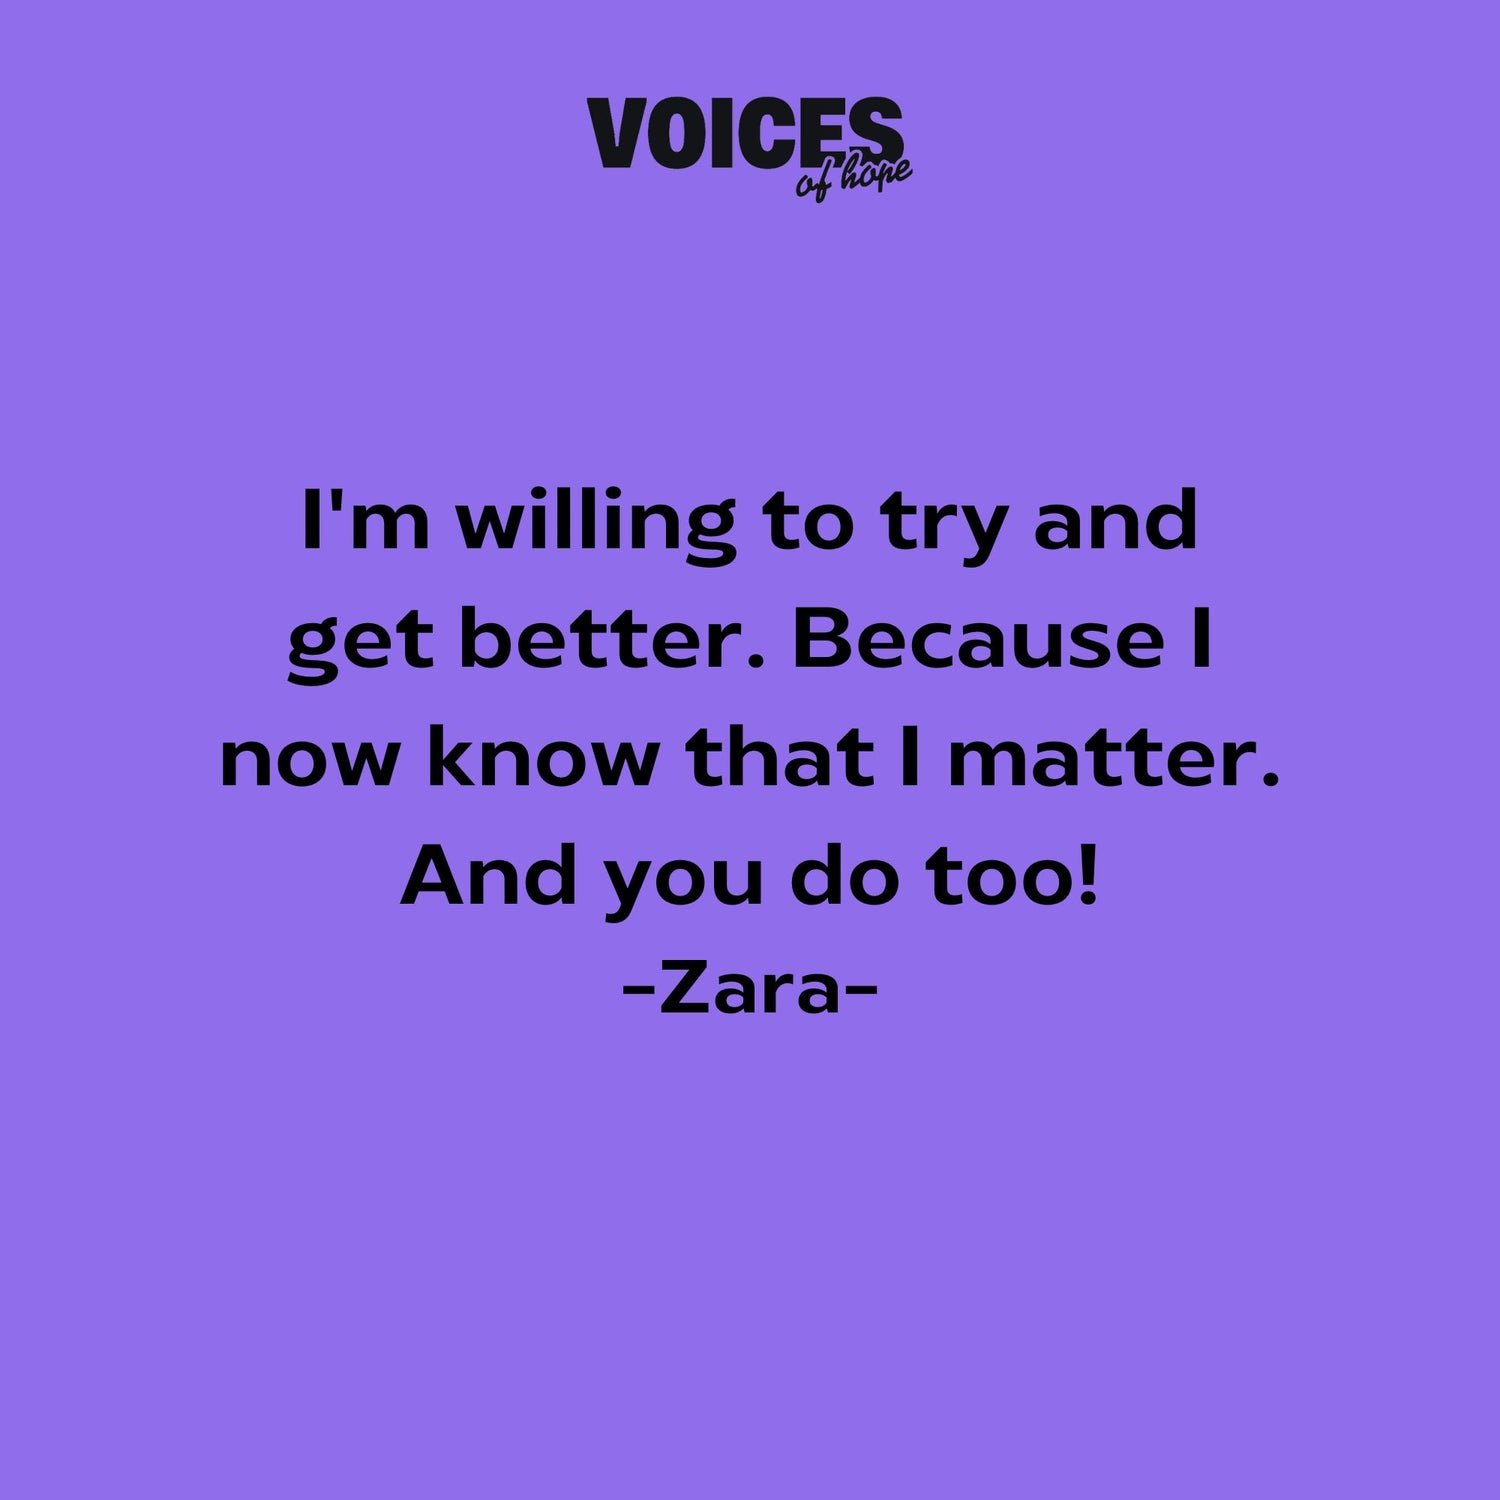 Purple background with black writing that reads: "I'm willing to try and get better. Because I now know that I matter. And you do too! Zara."